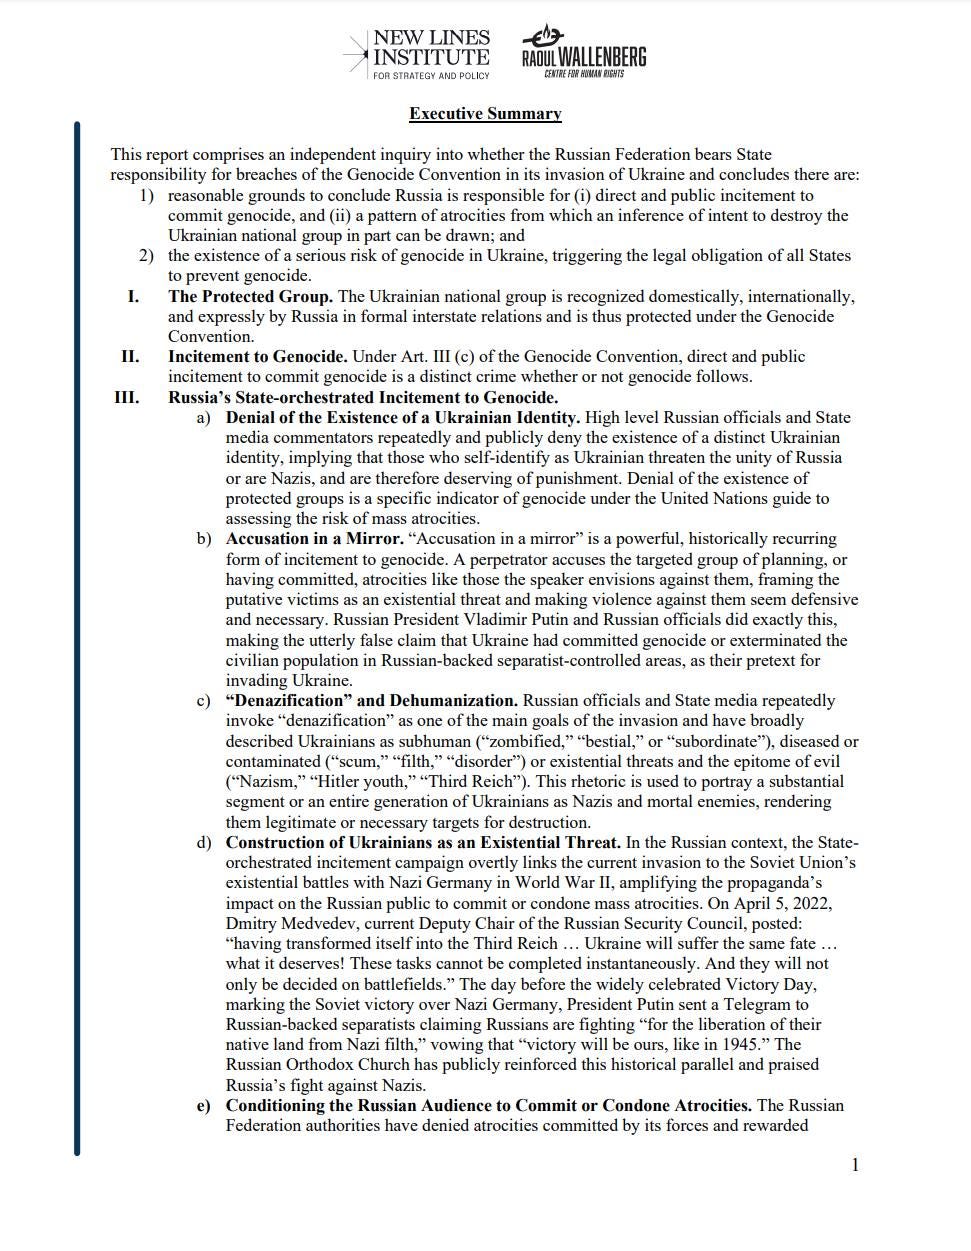 May be an image of text that says 'NEW LINES INSTITUTE RAOULWALLENBERG This comprises responsibility Summary independent inquiry into vhether pattern Russian Federation bears State invasior there direc public incitement which inference intent destroy the drawn; Ukraine, triggering Russia II. formal interstate elations obligation ofal States III. Art. internationally, protected under Genocide isa State Russian fficials distinct threaten Denial indicator genocide Mirror. guide perpetrator powerful, historically recurring making envisions defensive their Russian State segment subordinate"). threats portray substantial mortal enemies, rendering Nazi Germany the nvasiont April marking The And will Russia's Telegram publicly Russian Audiencet "victory this historical parallel and praised Commit Condone Atrocities. Russian'